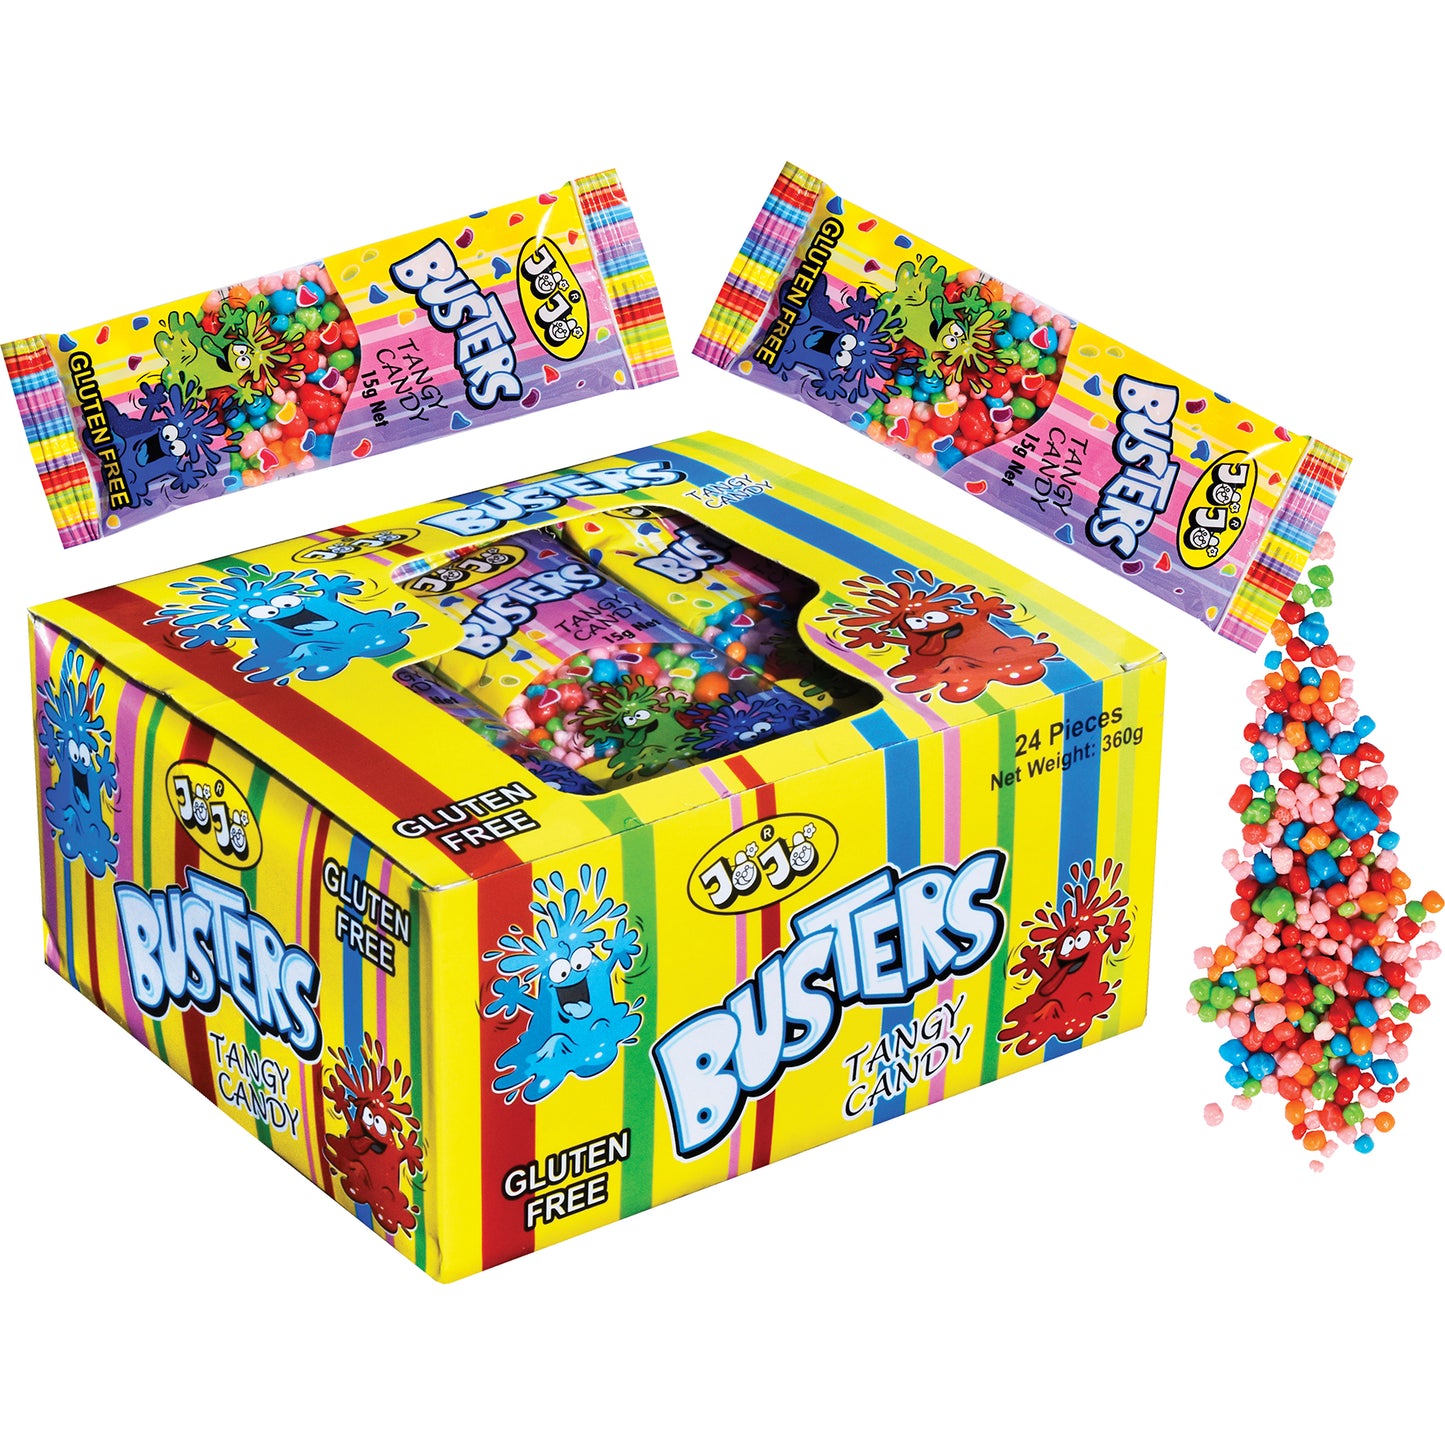 Busters Tangy Candy 15g